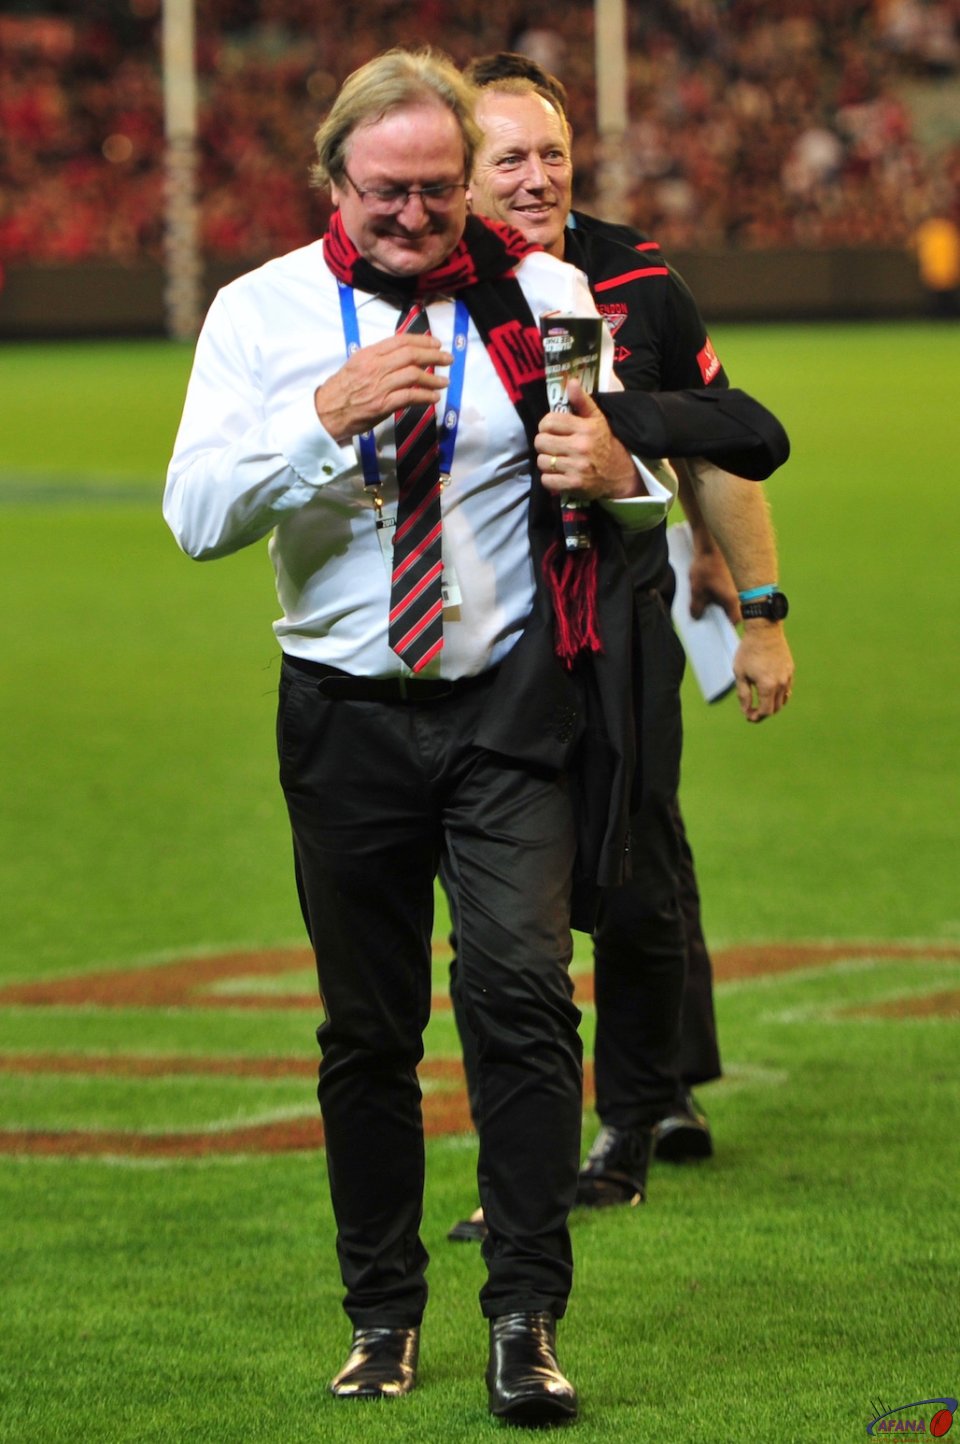 Kevin Sheedy is exstatic after the Bombers win